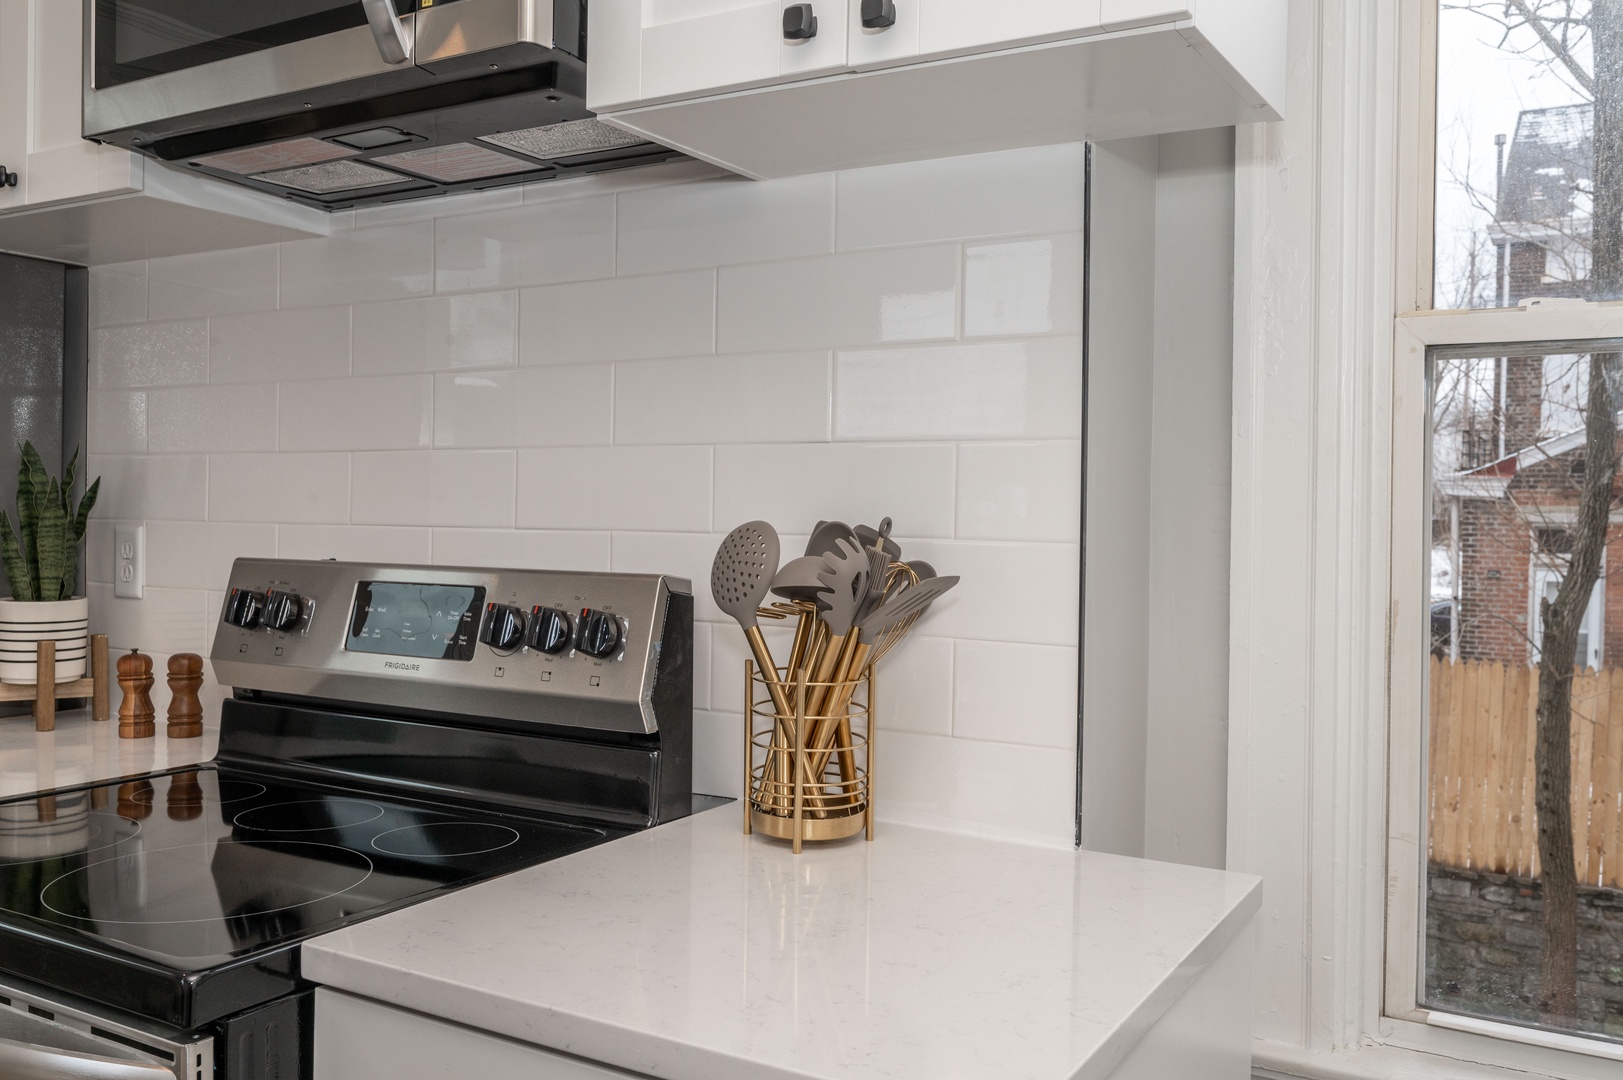 The eat-in kitchen offers ample space & all the comforts of home